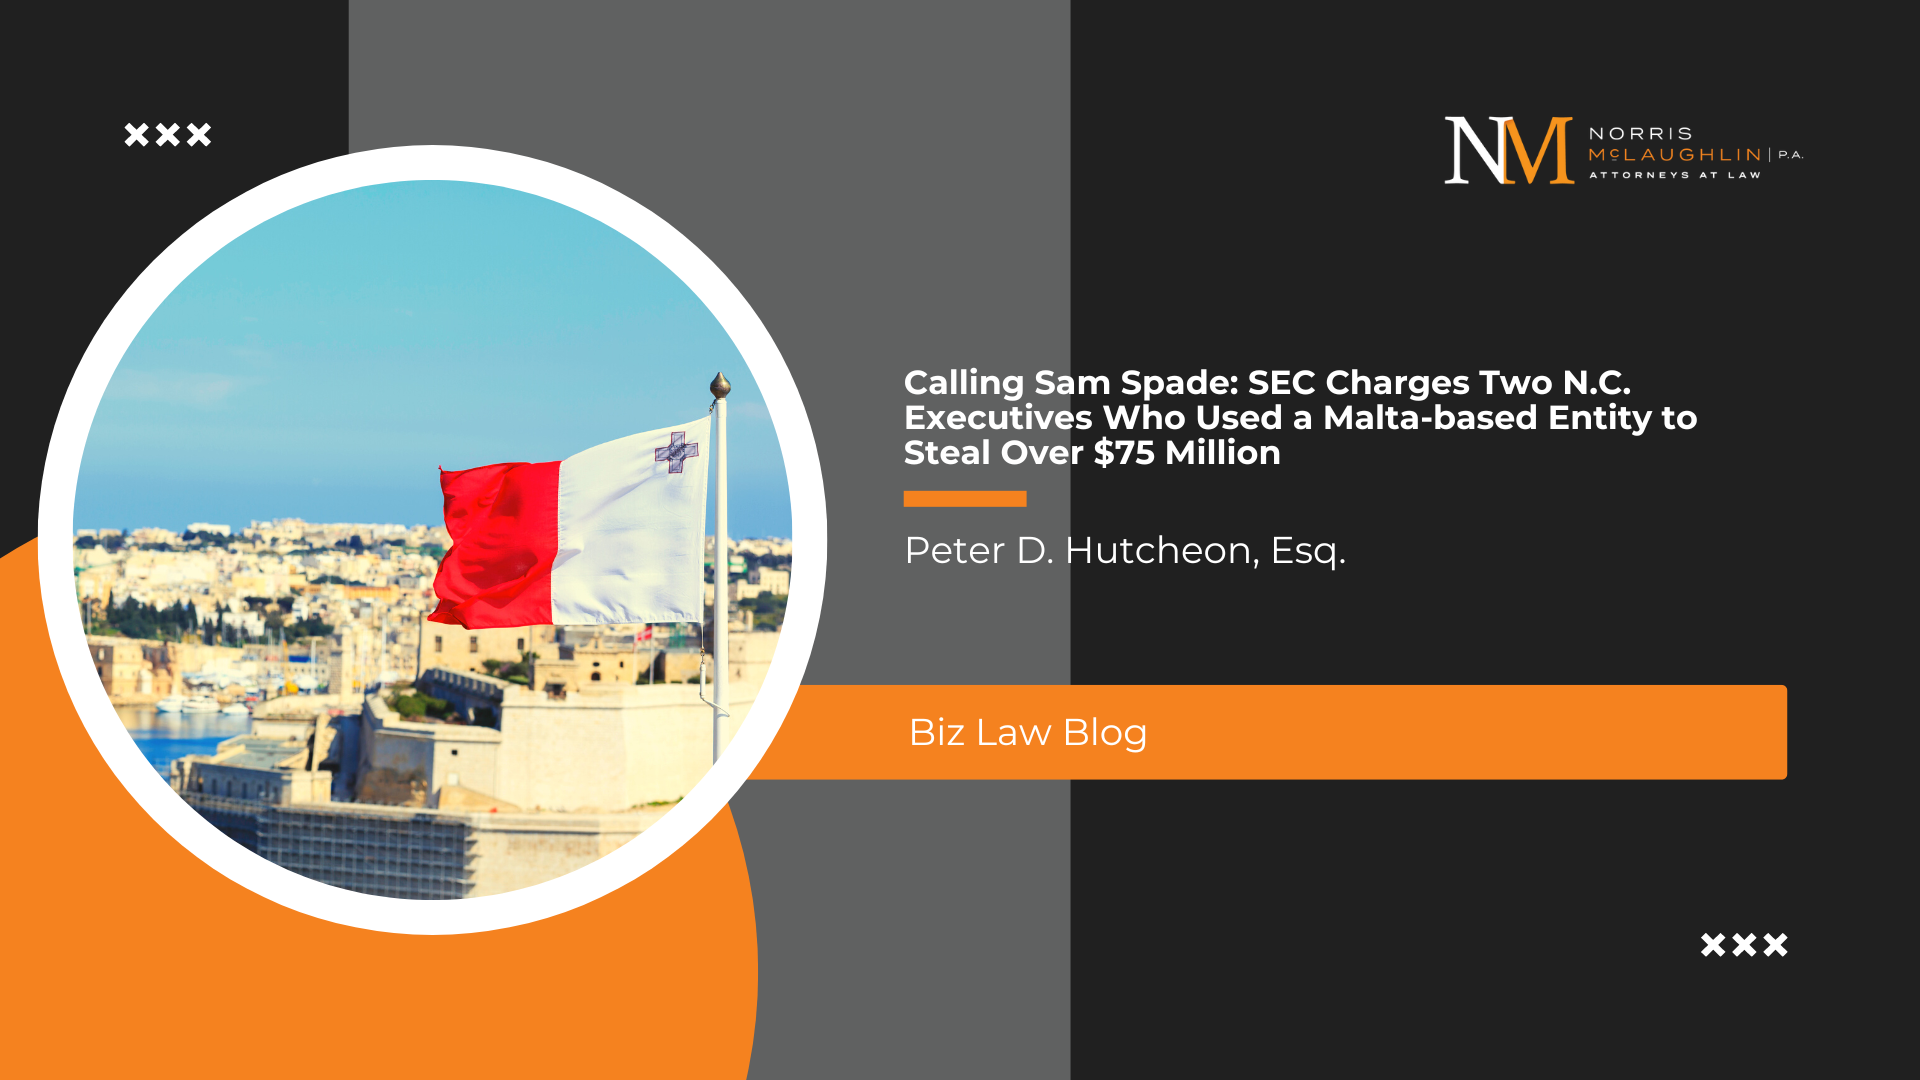 Calling Sam Spade: SEC Charges Two N.C. Executives Who Used a Malta-based Entity to Steal Over $75 Million